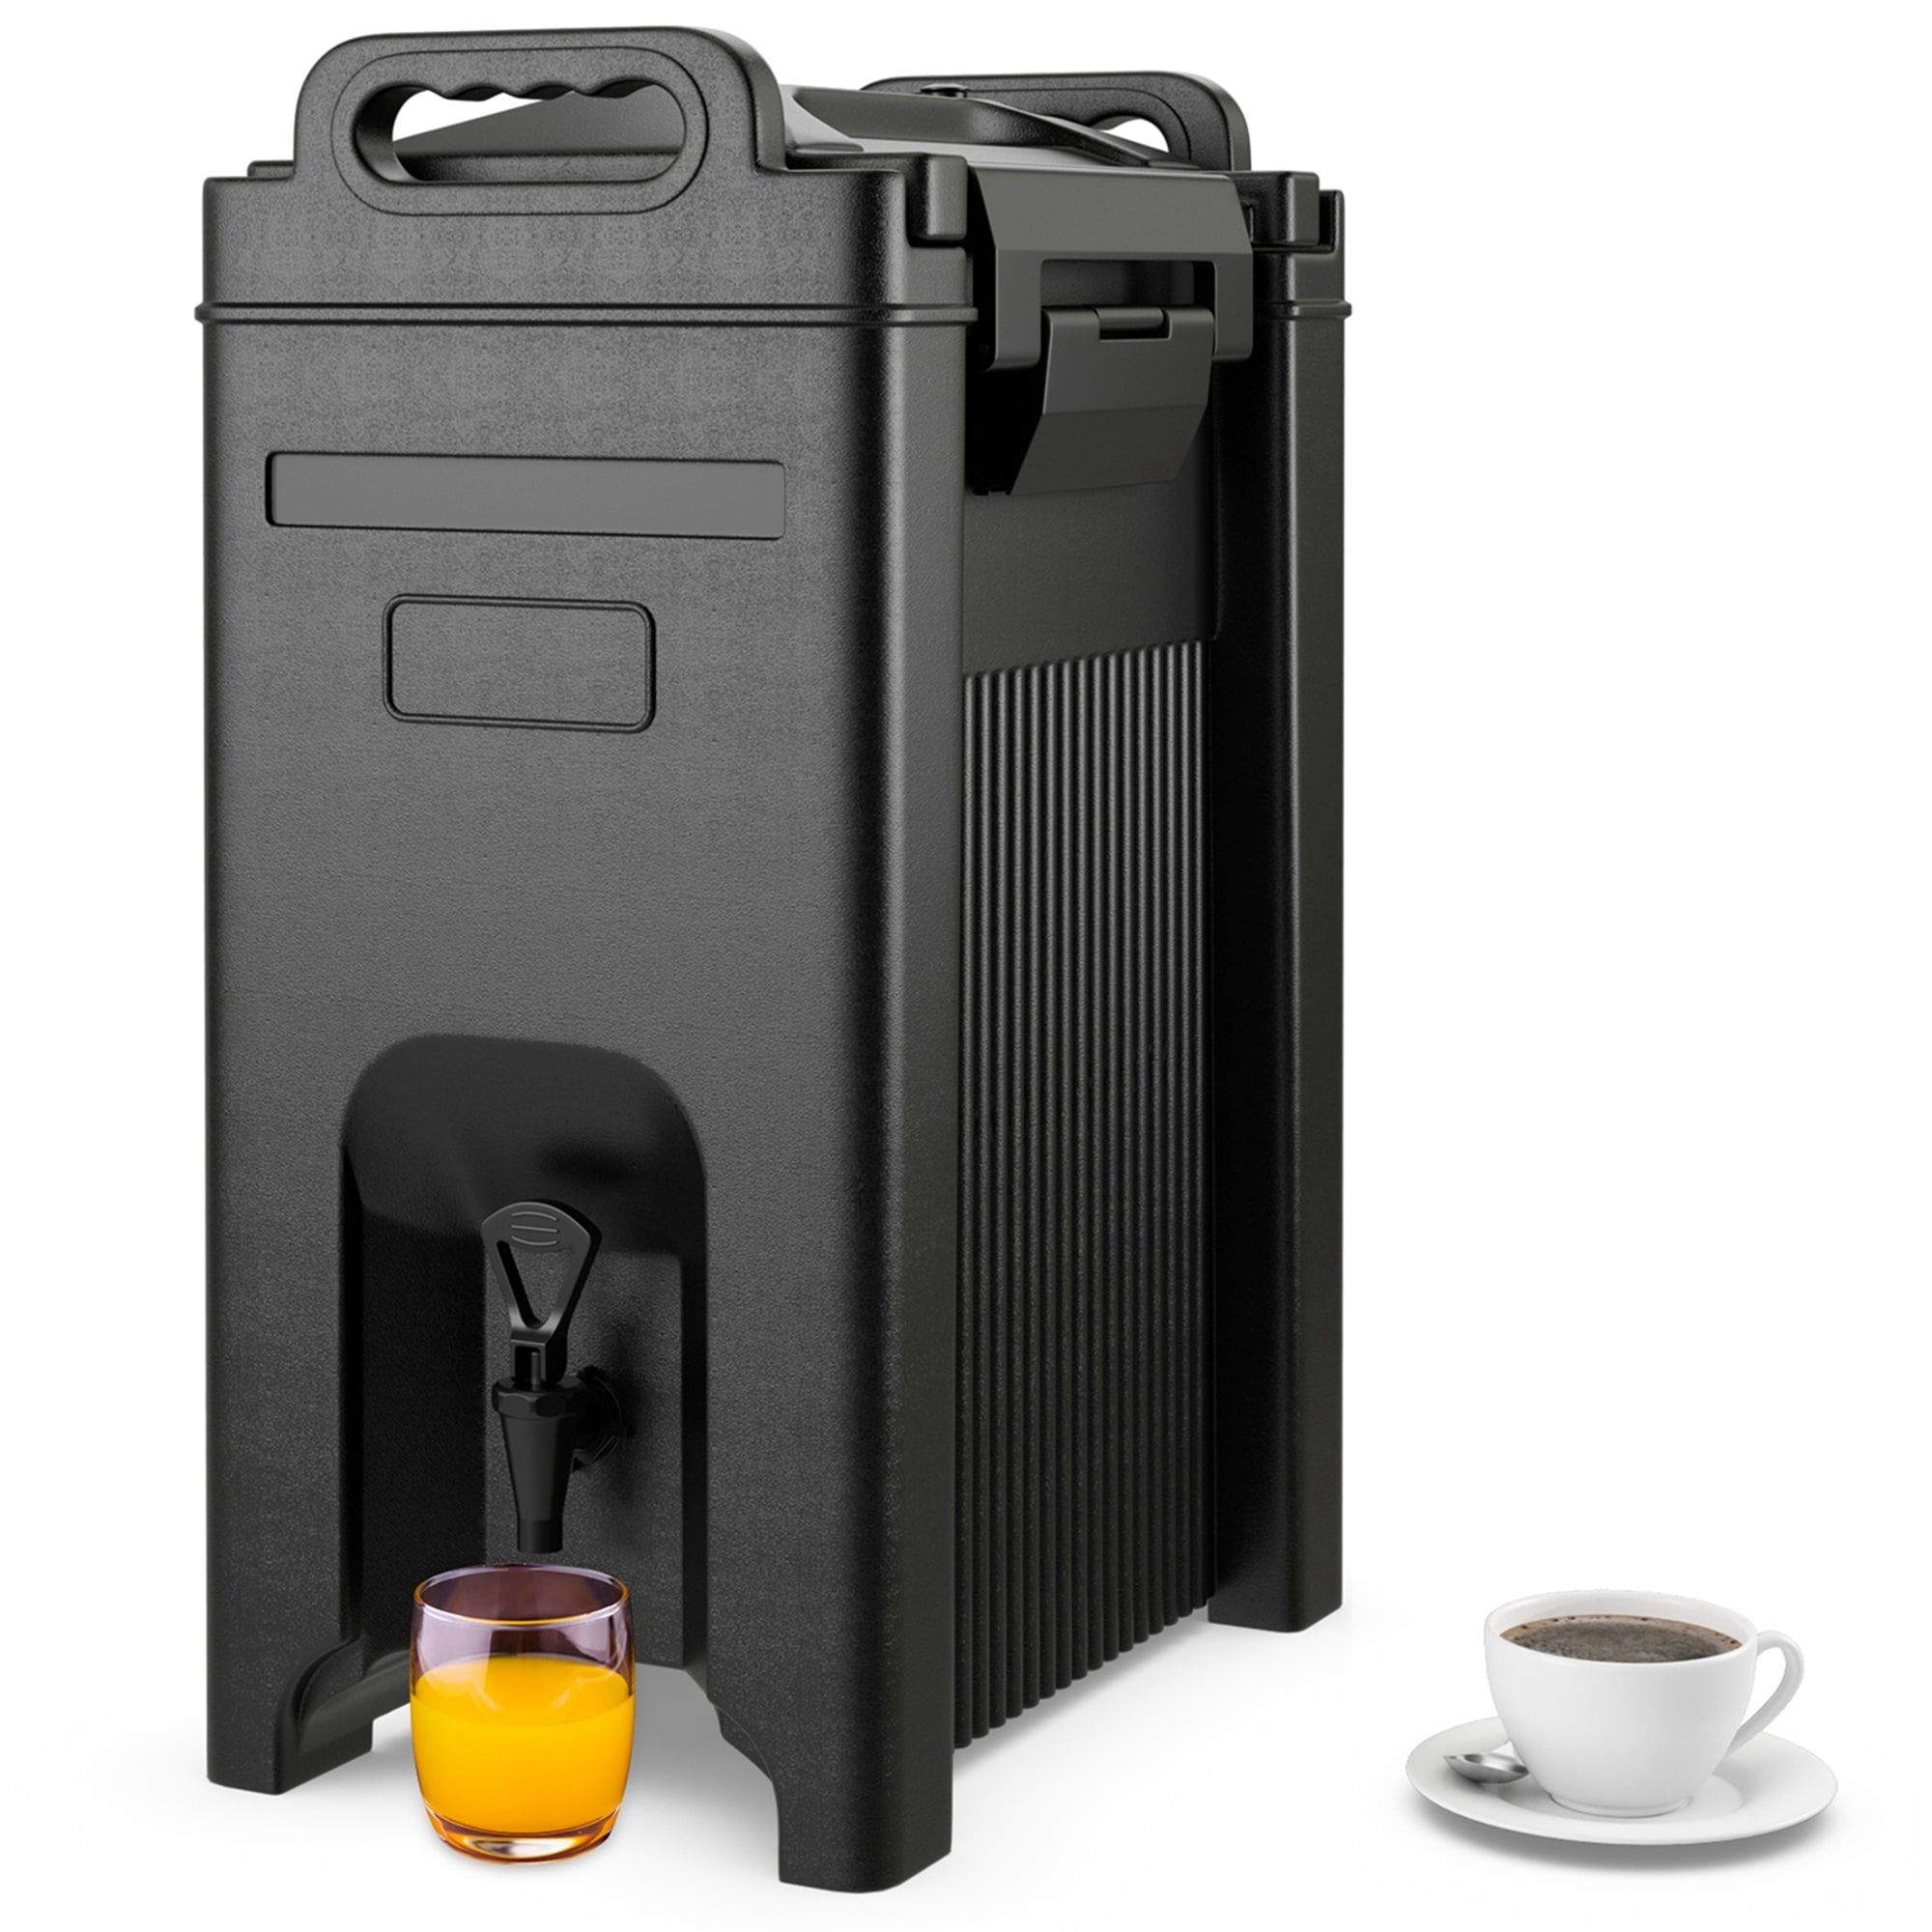 https://ak1.ostkcdn.com/images/products/is/images/direct/9631cafe348b047270089edfd0dbed88f9093a52/Costway-Insulated-Beverage-Server-Dispenser-5-Gallon-Hot-Cold-Drinks.jpg